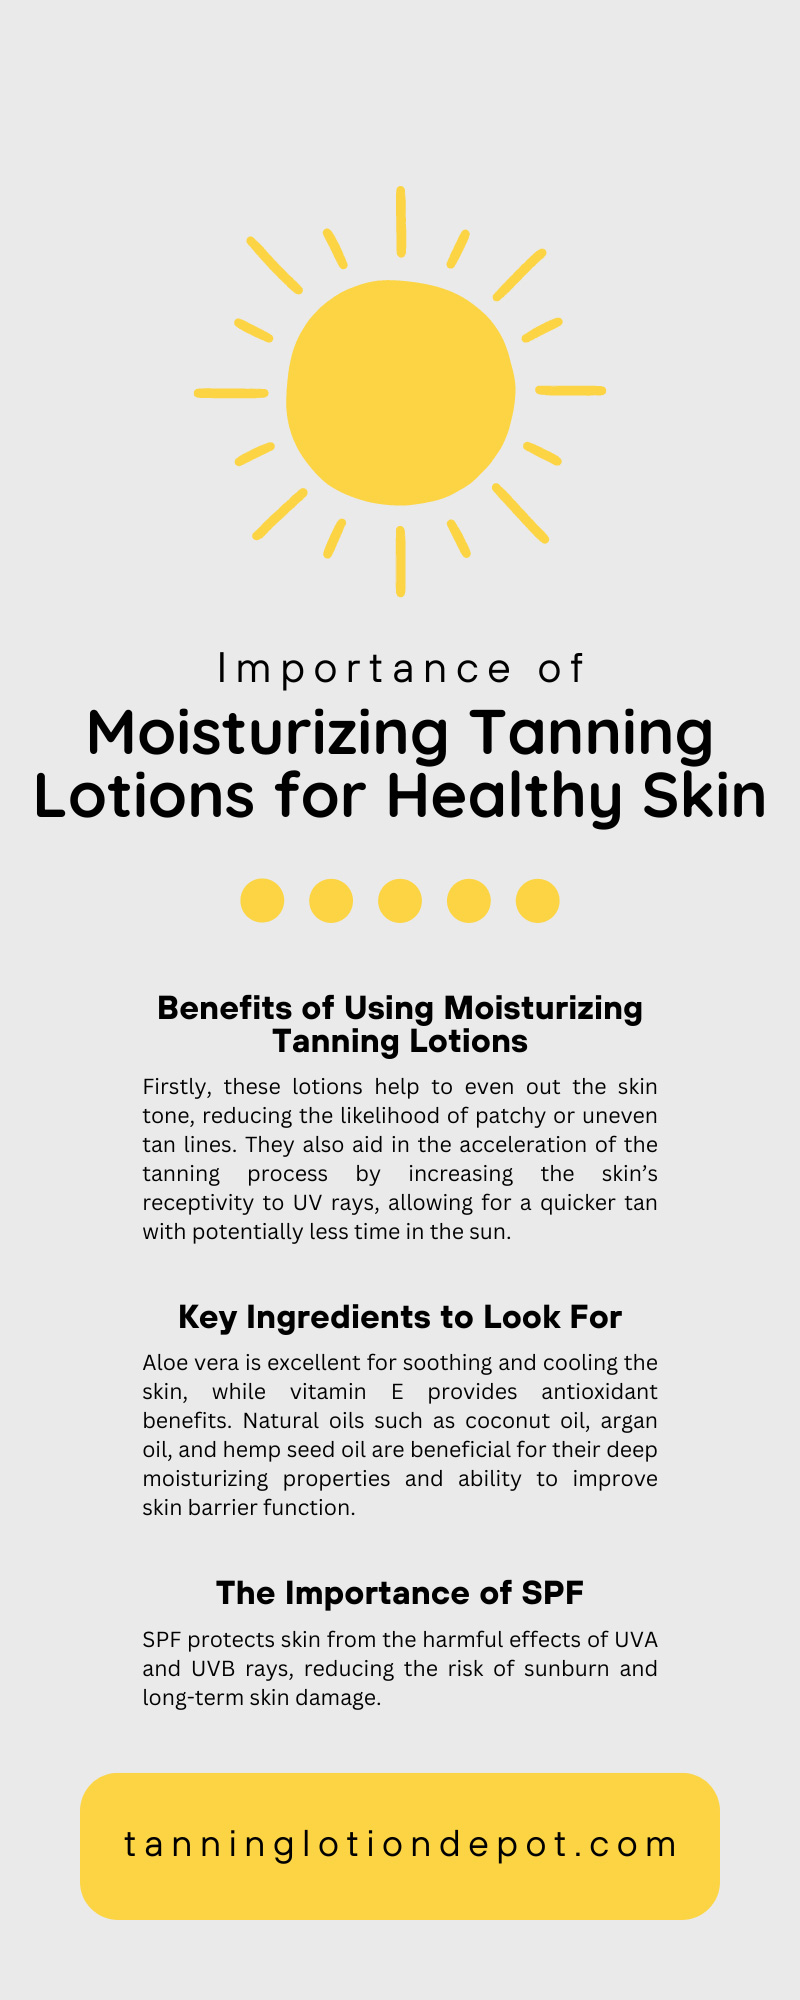 Importance of Moisturizing Tanning Lotions for Healthy Skin